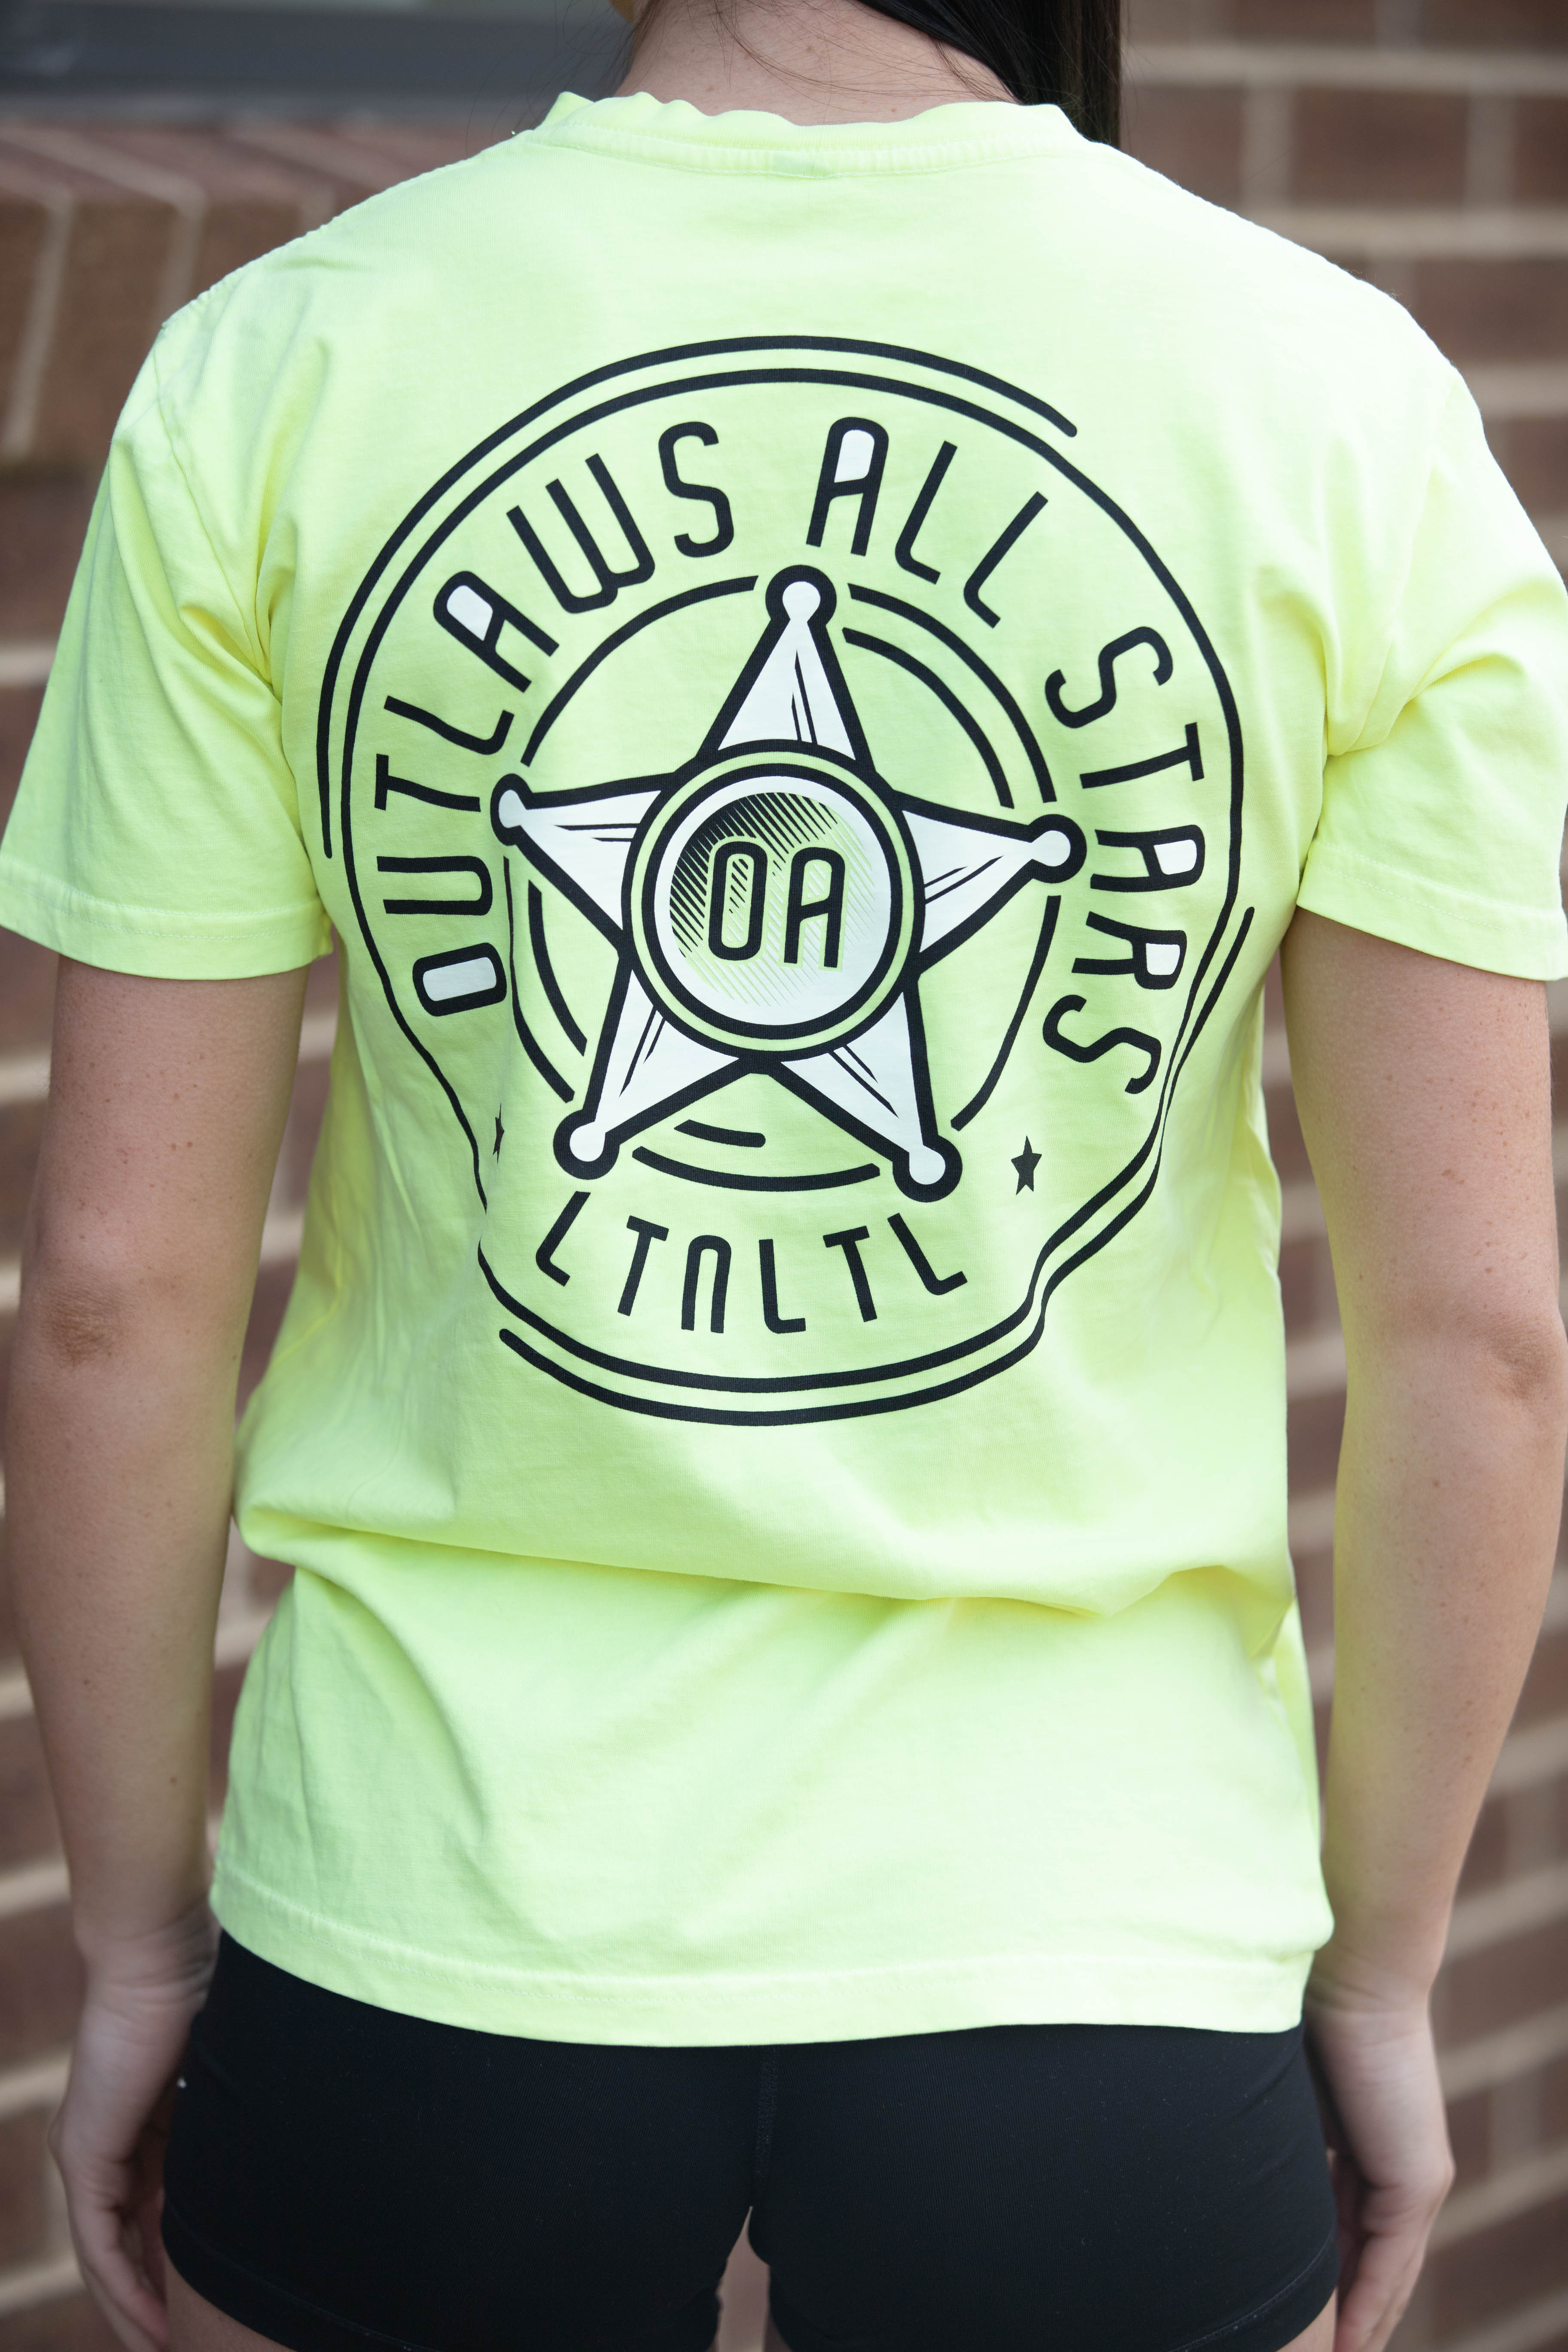 Neon Outlaws All Stars Tee